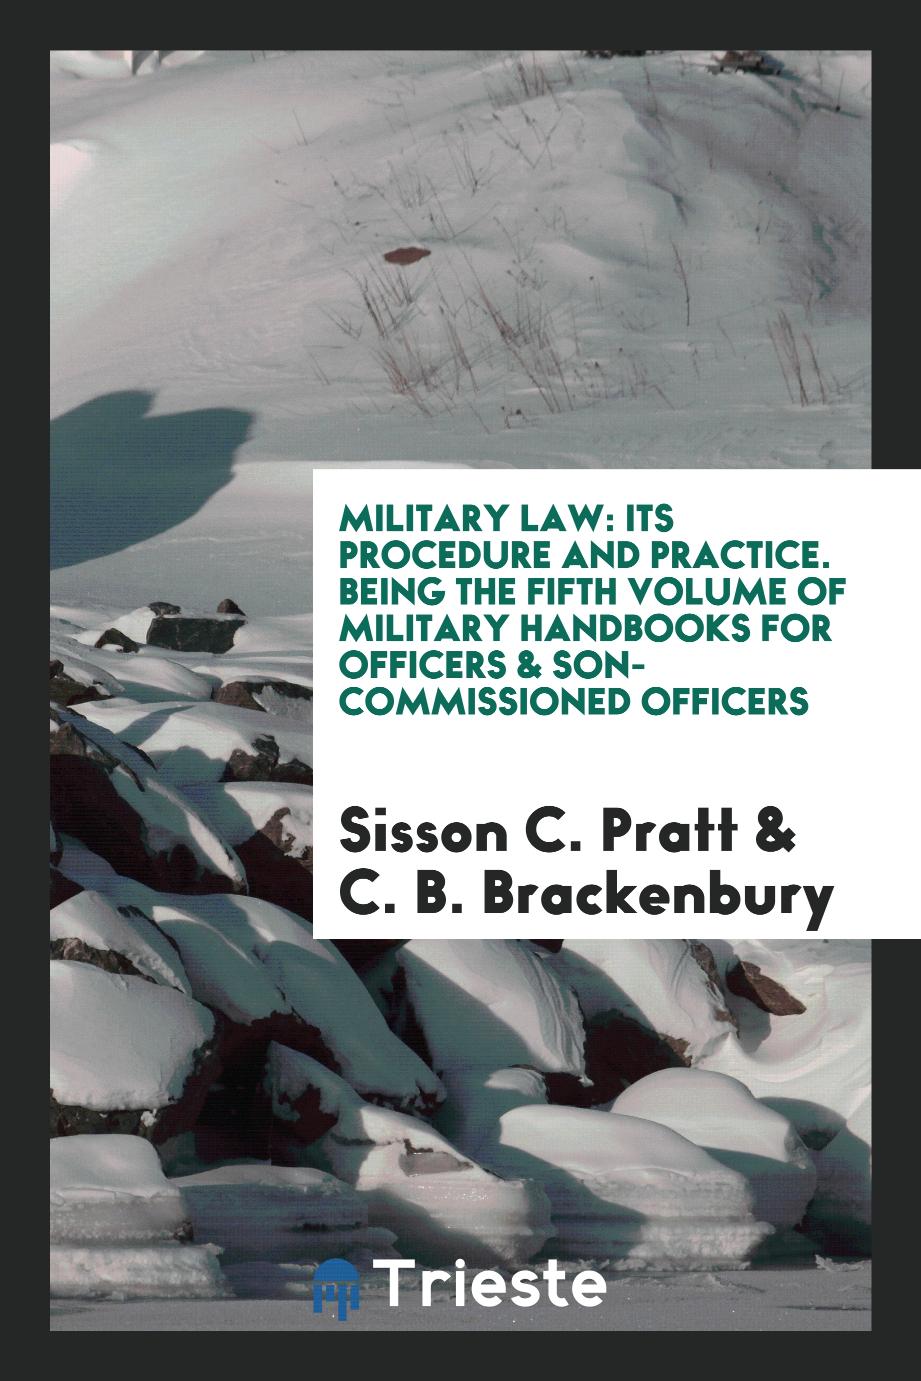 Military Law: Its Procedure and Practice. Being the Fifth Volume of Military Handbooks for Officers & Son-Commissioned Officers